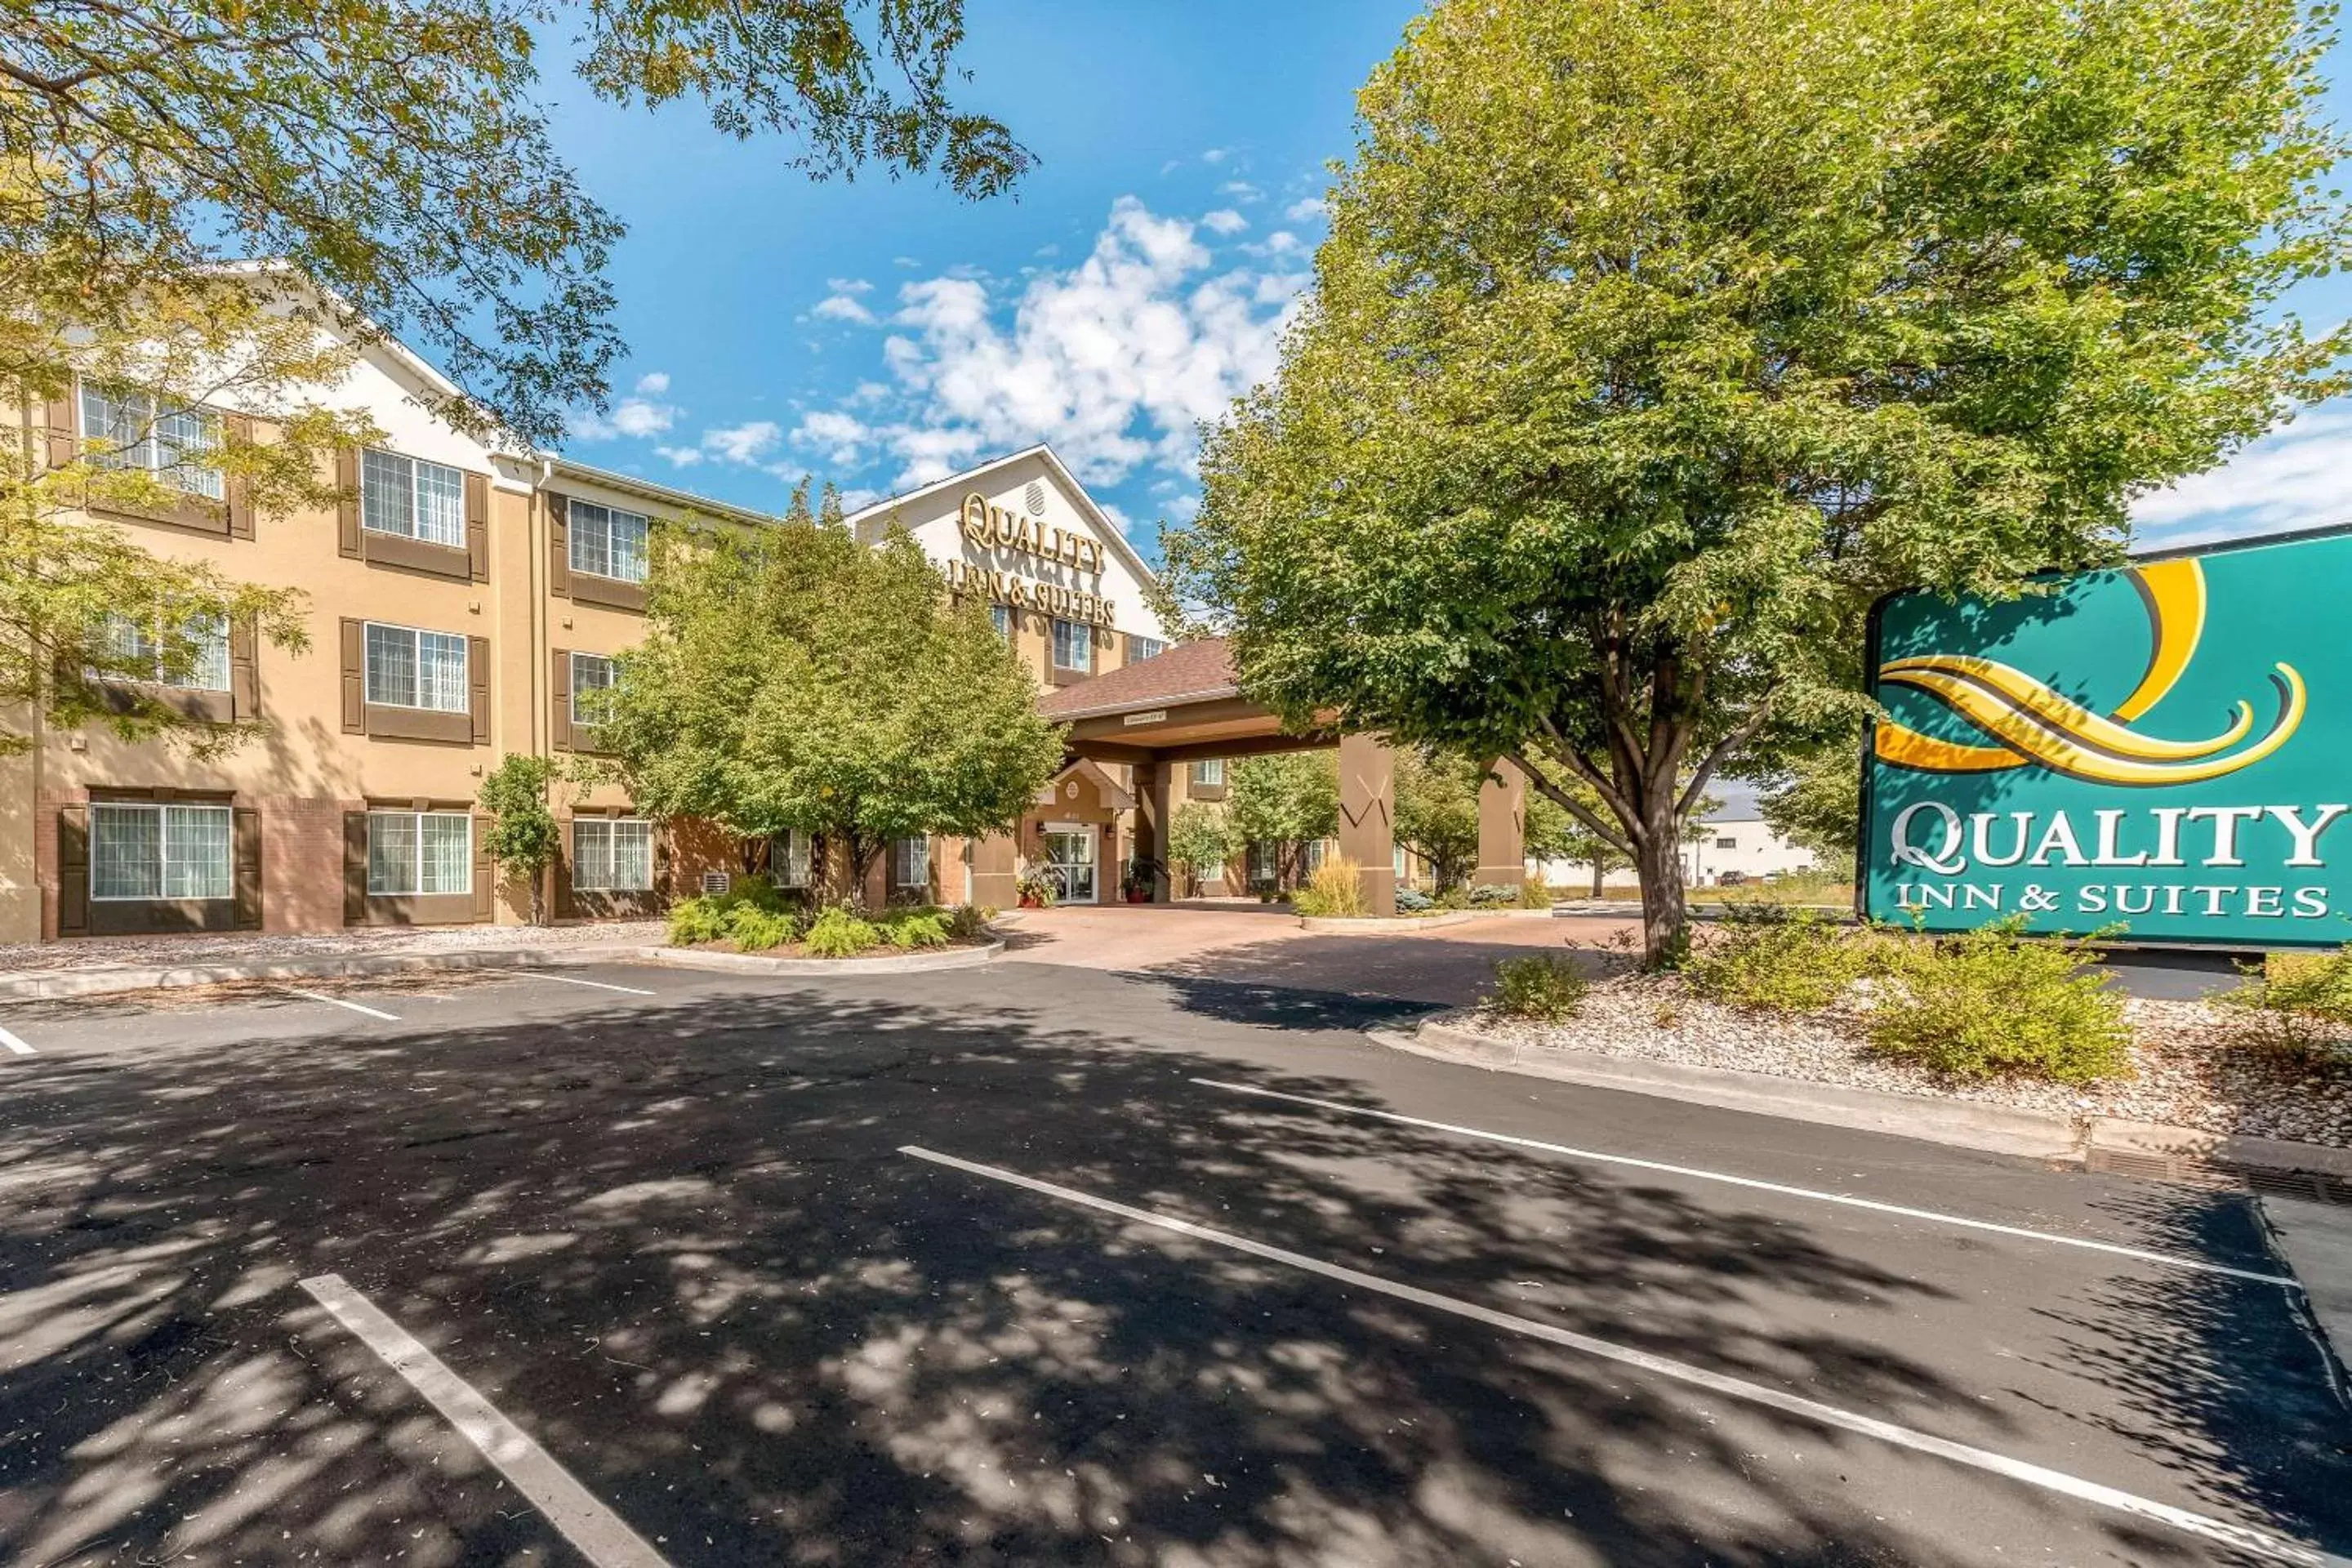 Property building in Quality Inn & Suites University Fort Collins